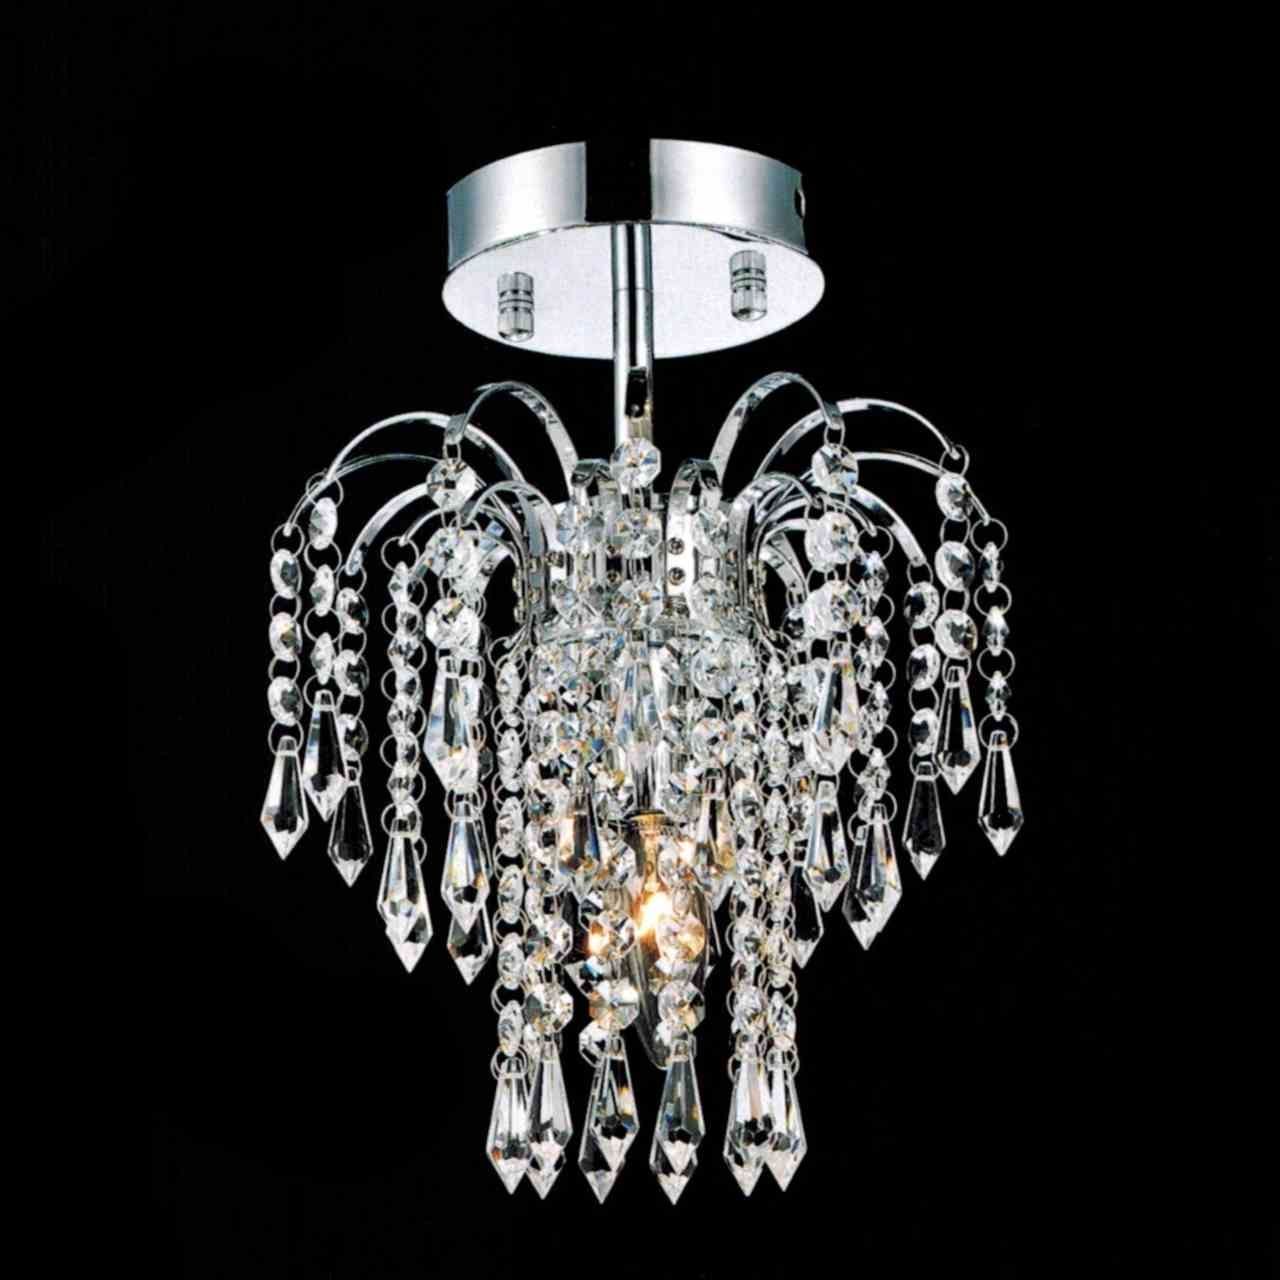 Brizzo Lighting Stores 12 Fountain Crystal Semi Flush Mount With Small Chrome Chandelier (View 5 of 15)